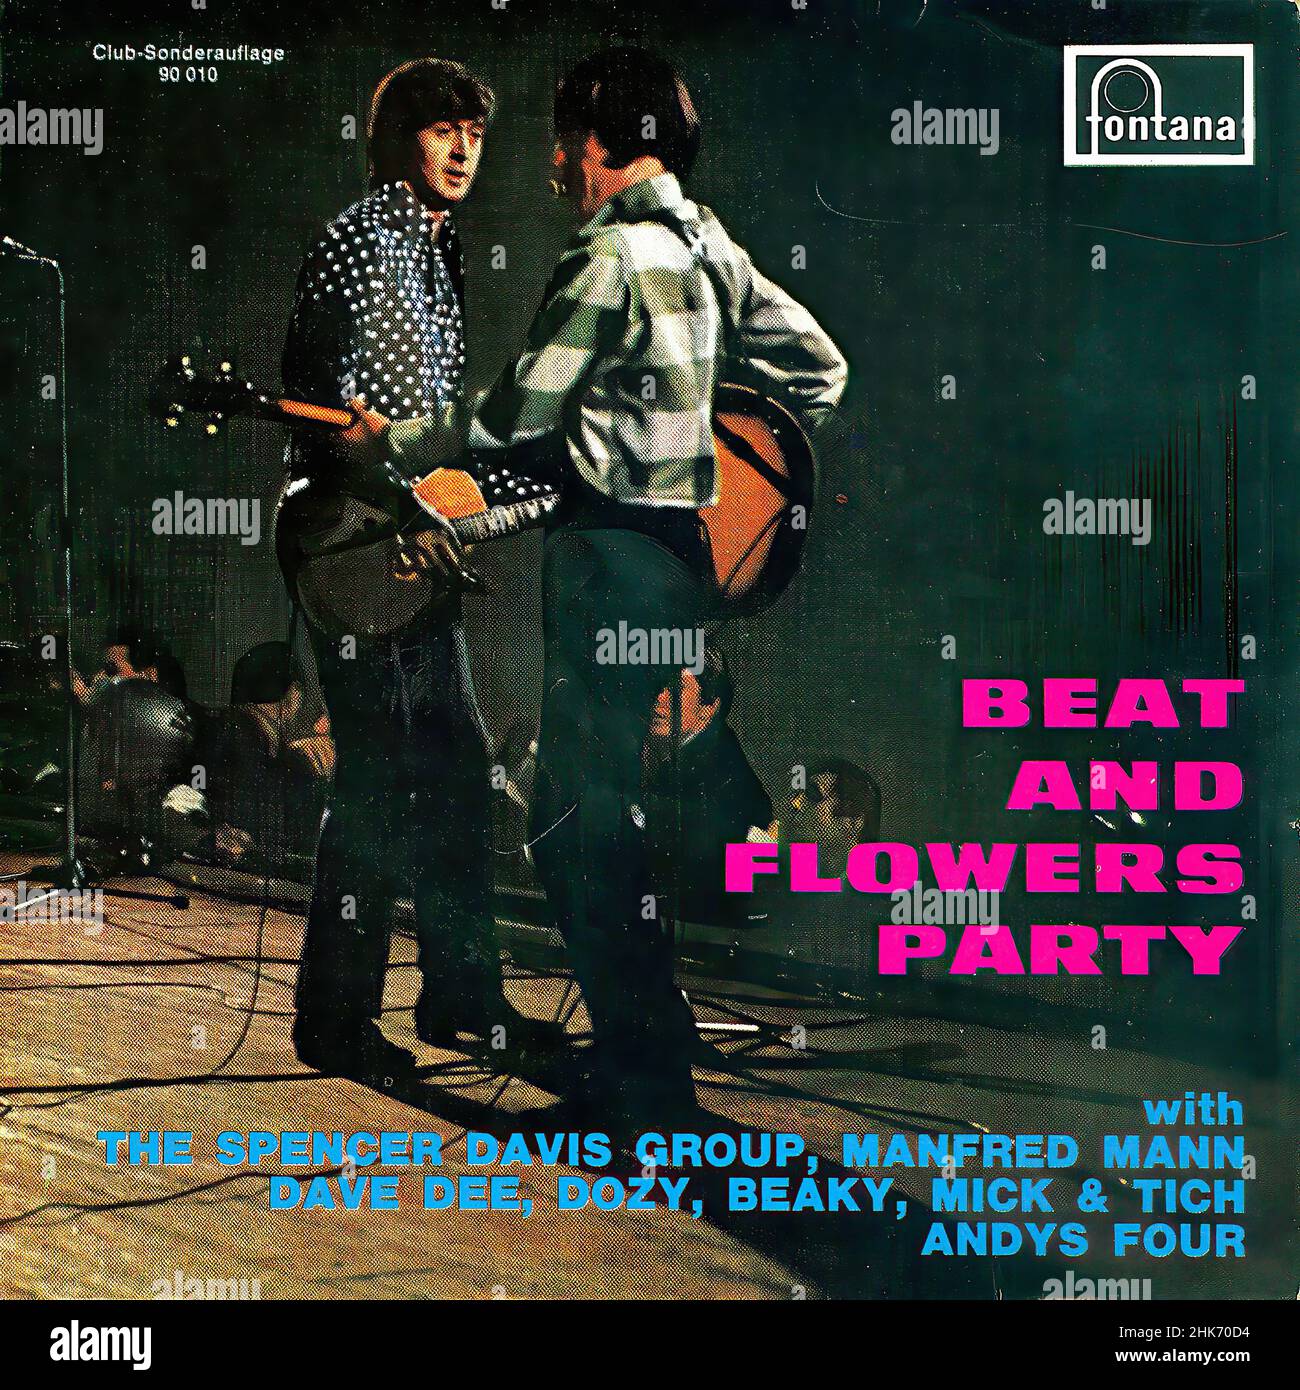 Vintage vinyl record cover - Spencer Davis Group, The - Manfred Mann - Dave Dee, Dozy Beaky, Mick & Tich - Andy's Four - Beat And Flowers Party - Austria -  1967 Stock Photo